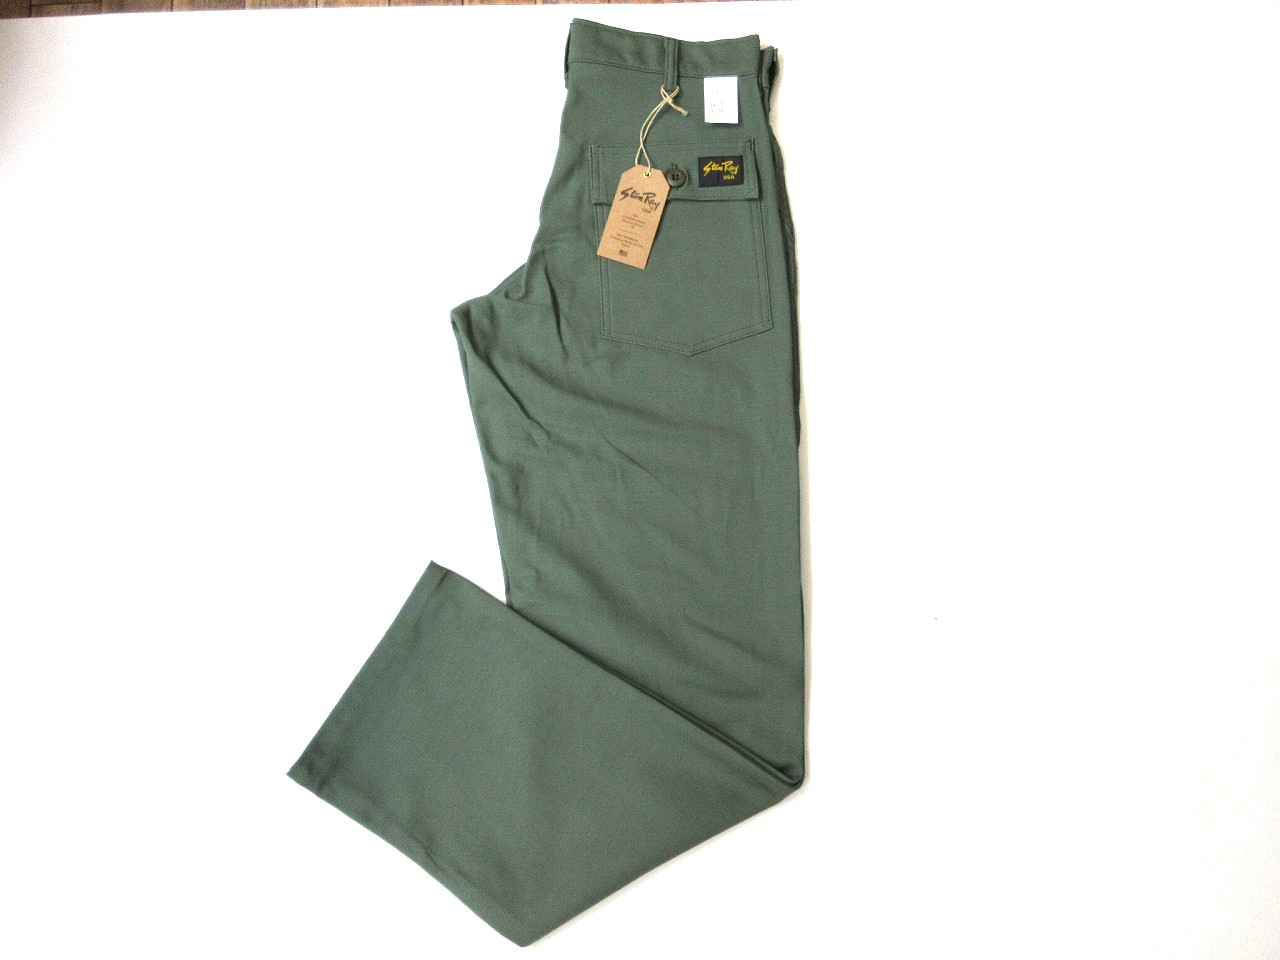 STAN RAY 4 POCKET FATIGUE PANTS OLIVE SATEEN - EVERGREEN